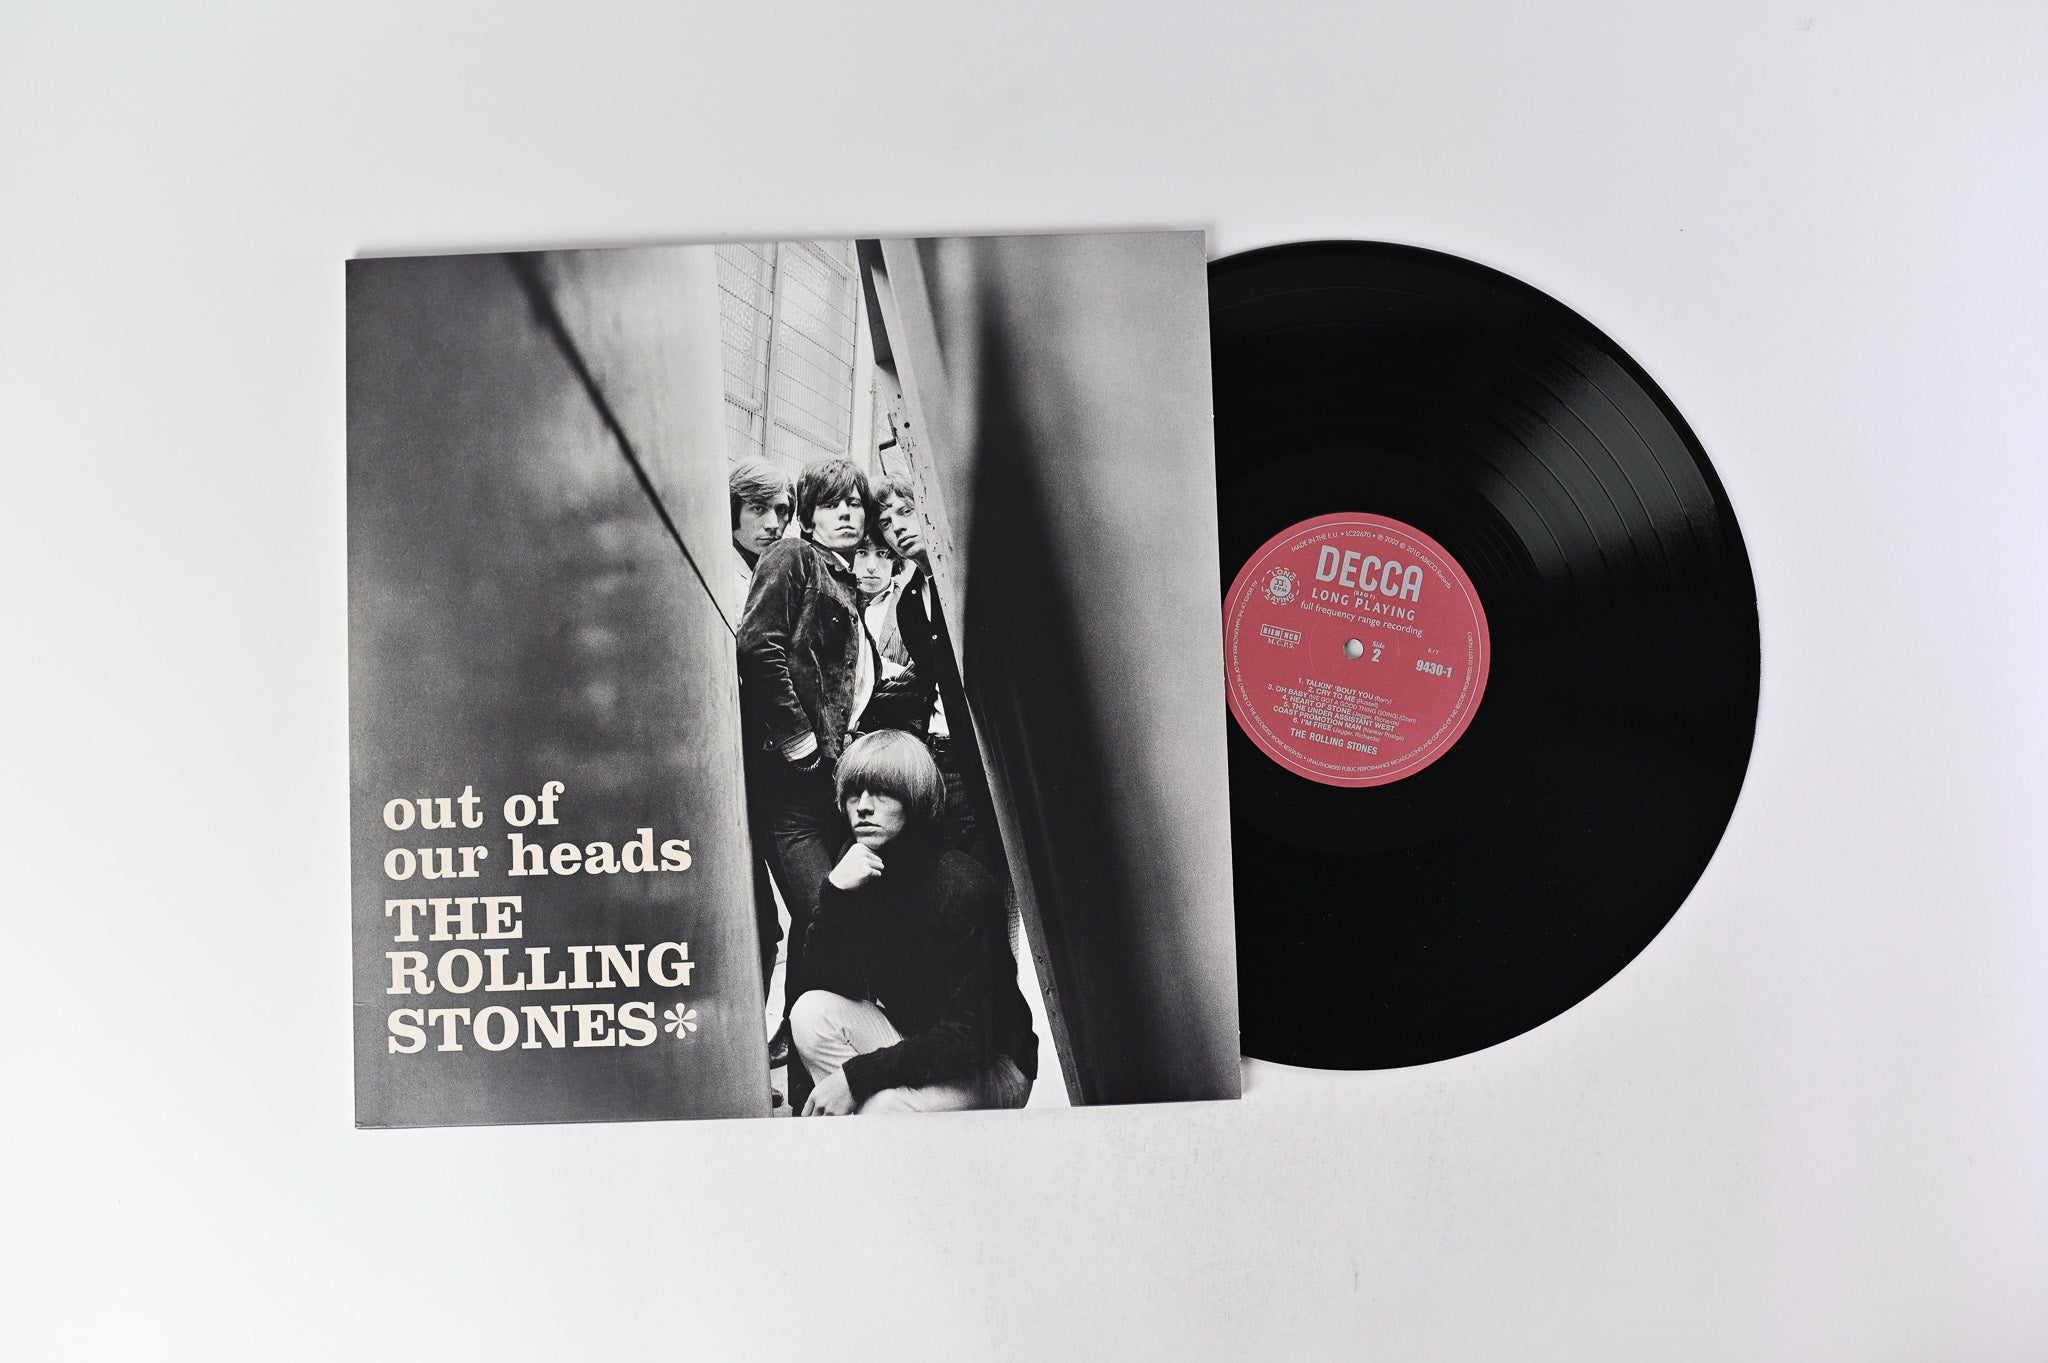 The Rolling Stones - Out Of Our Heads on ABKCO - Mono